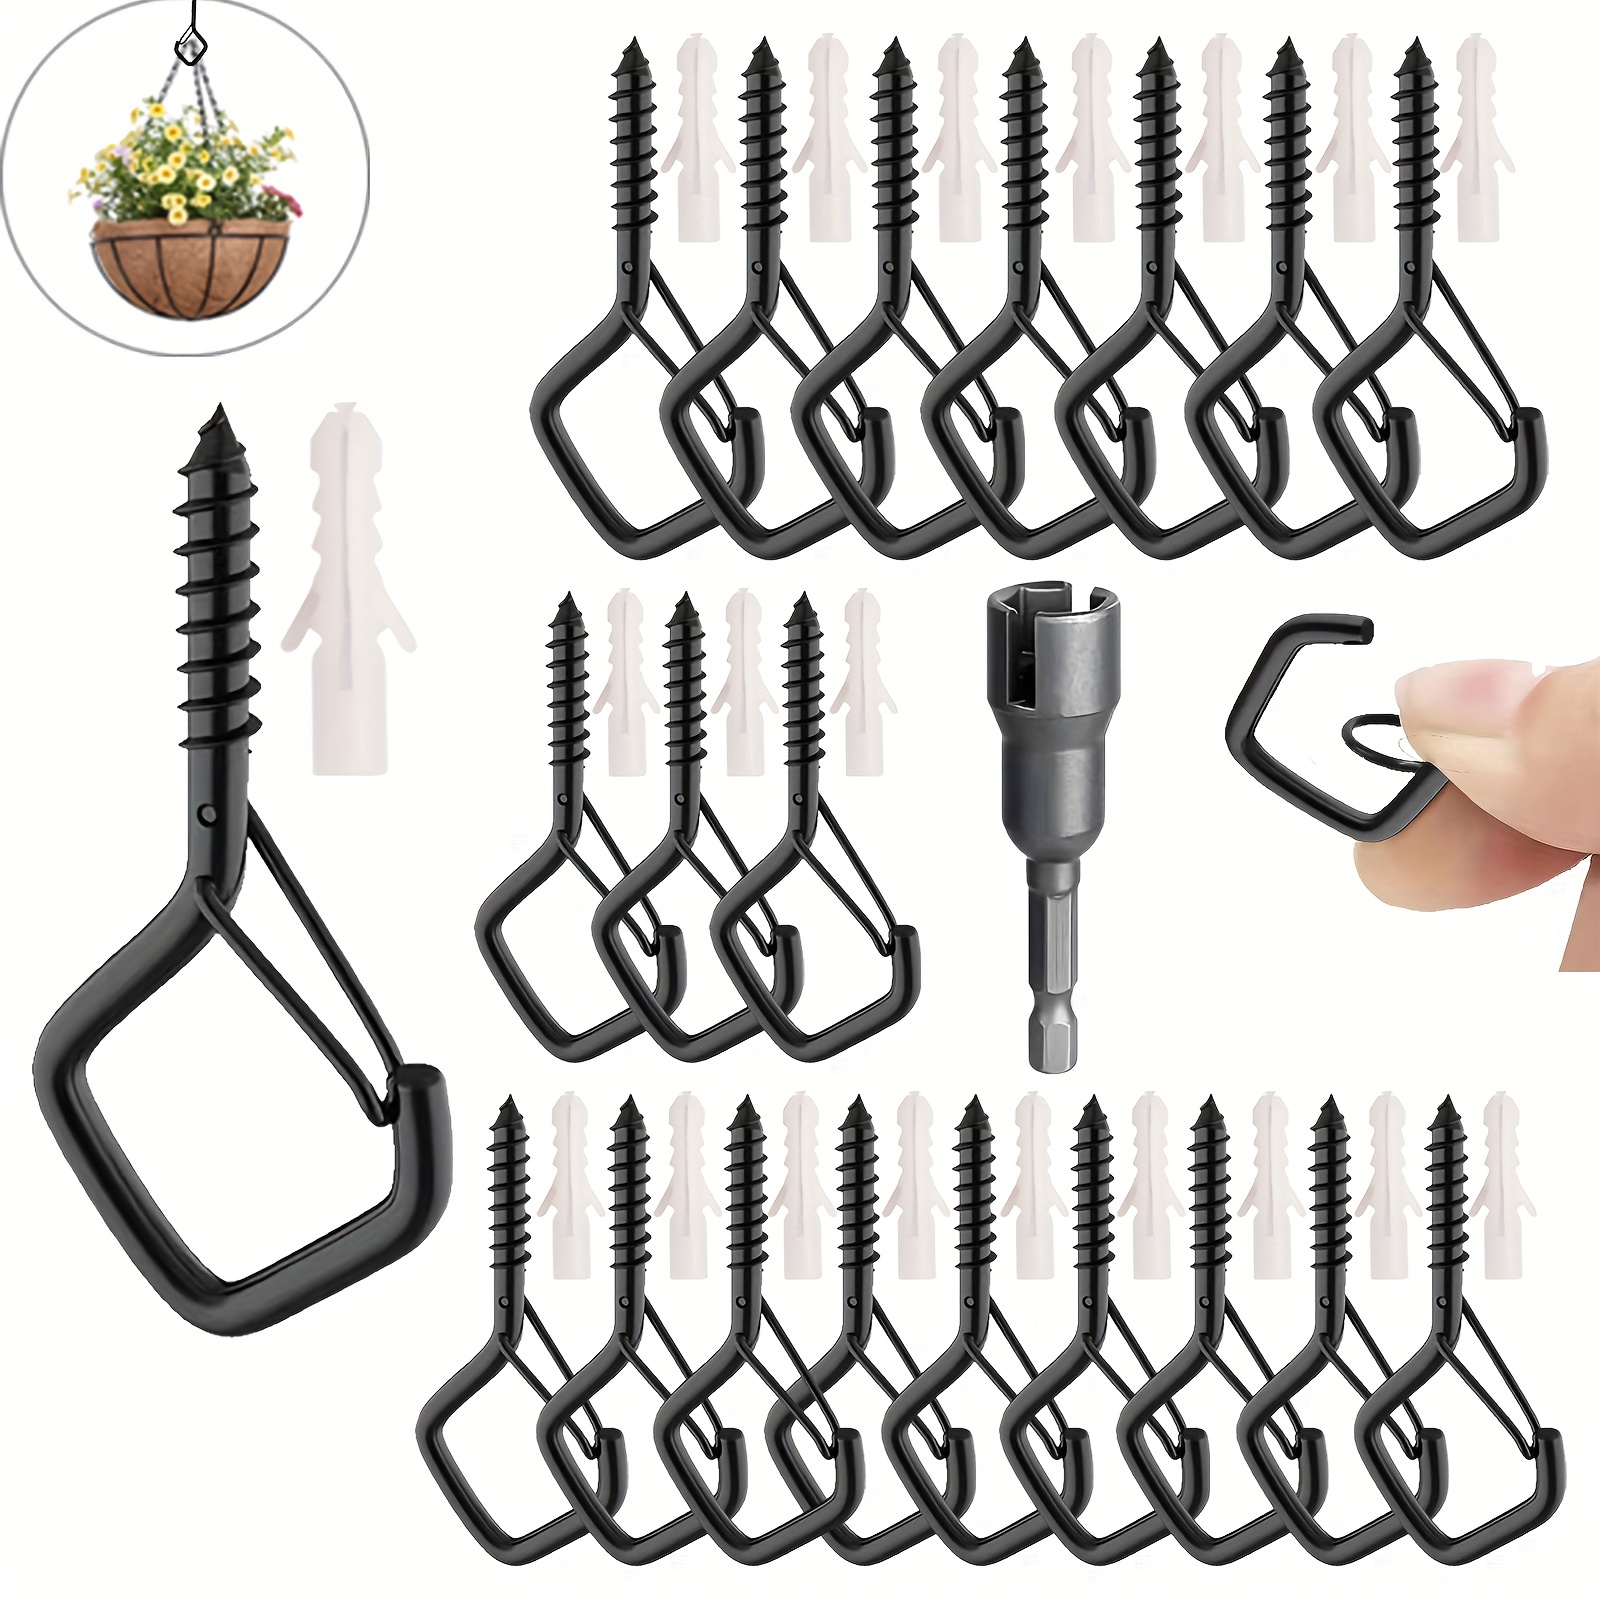 100pcs/pack Small Metallic Screw-in Hooks For Jewelry Art Craft Key Cap  Plant String Light Windchime Hanging, Essential For Home